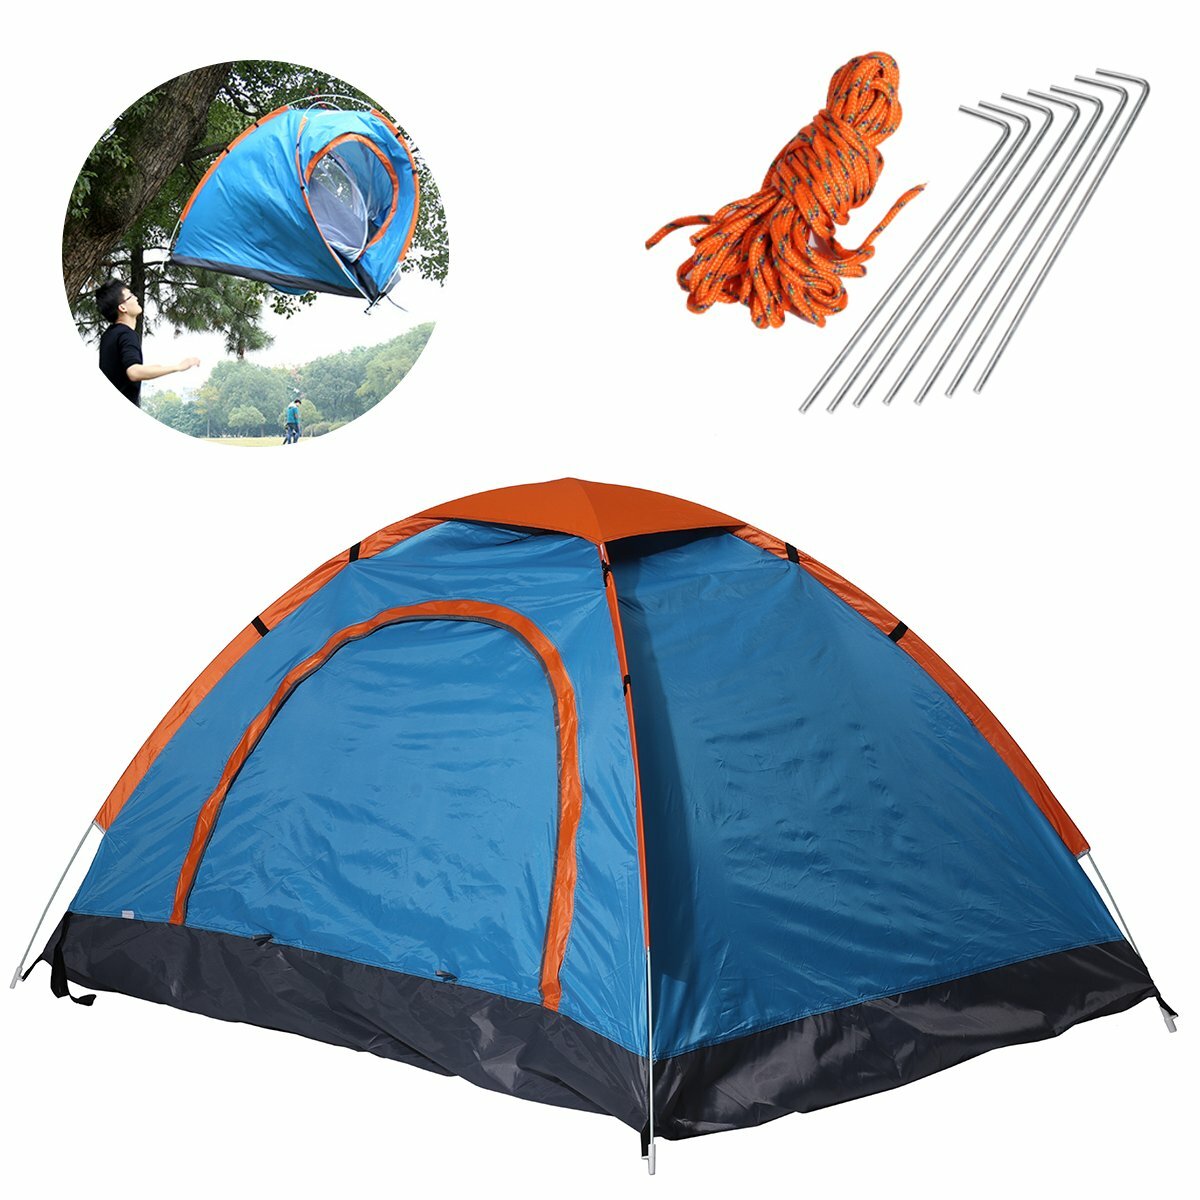 79x59x39inch 2 People Camping Tent Folding Waterproof Ultralight Sunshade Canopy Outdoor Travel Hiking